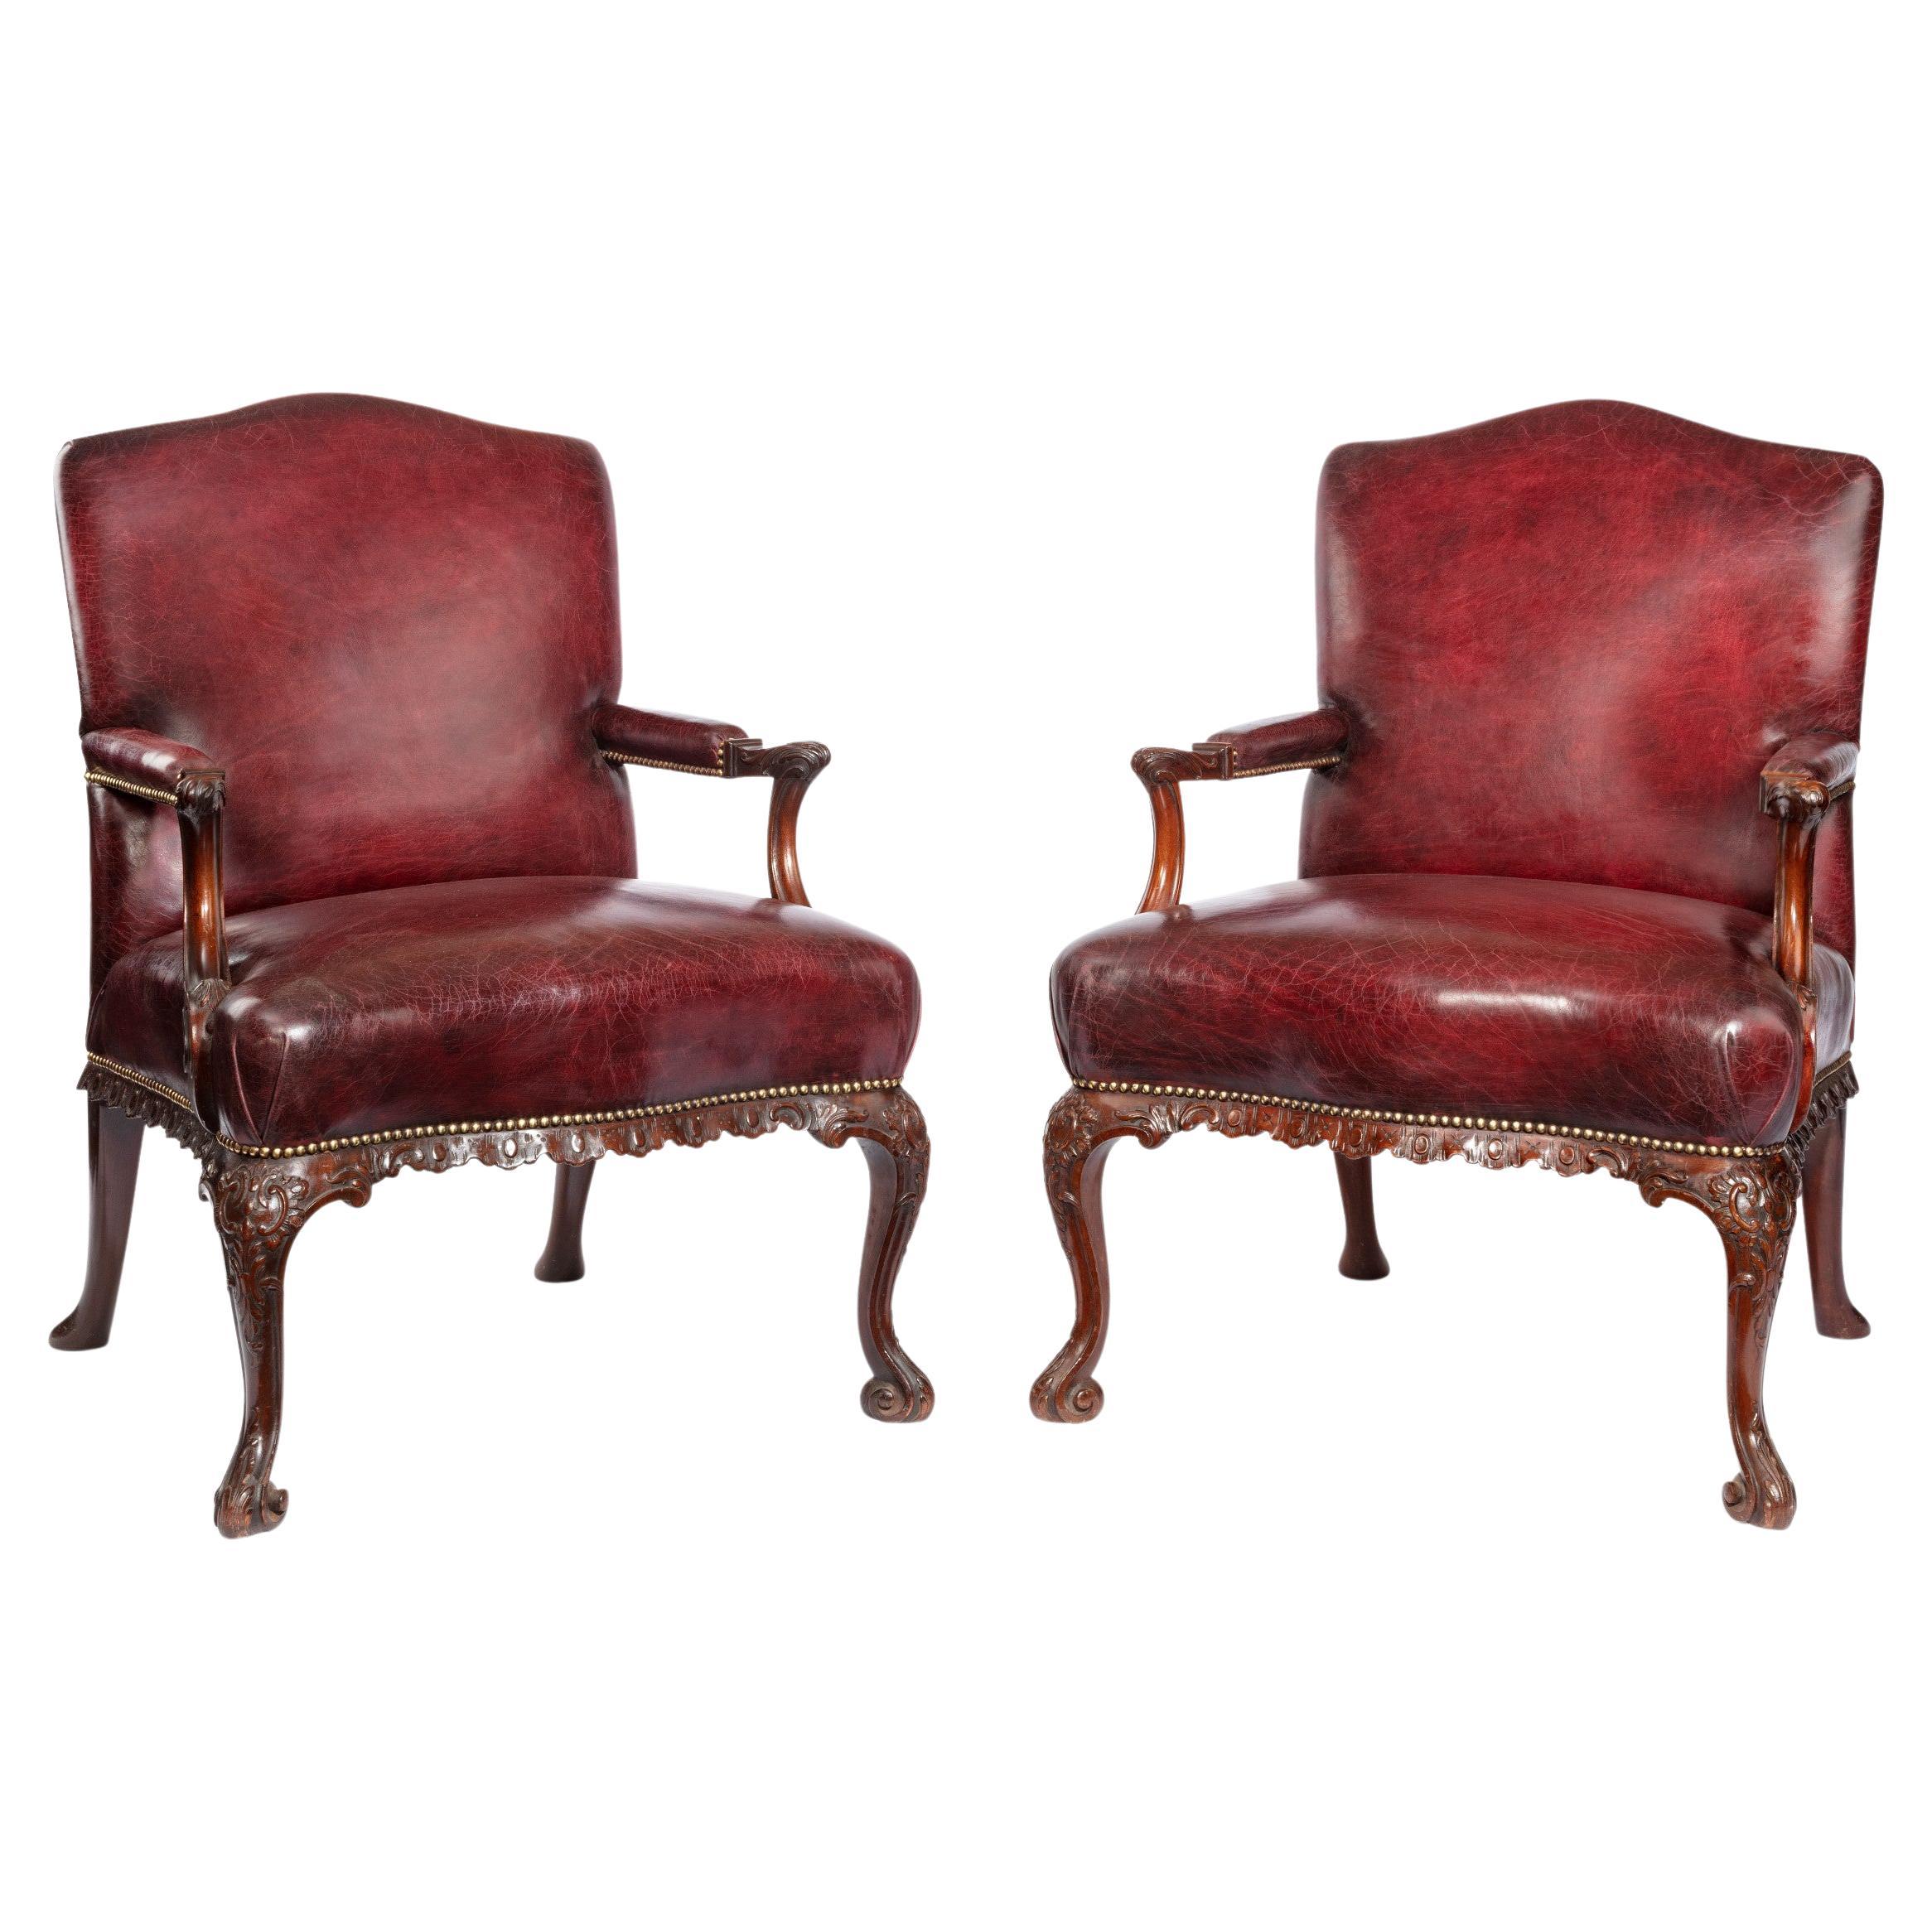 Late Victorian Mahogany Open Arm Chairs in the Chippendale Taste For Sale